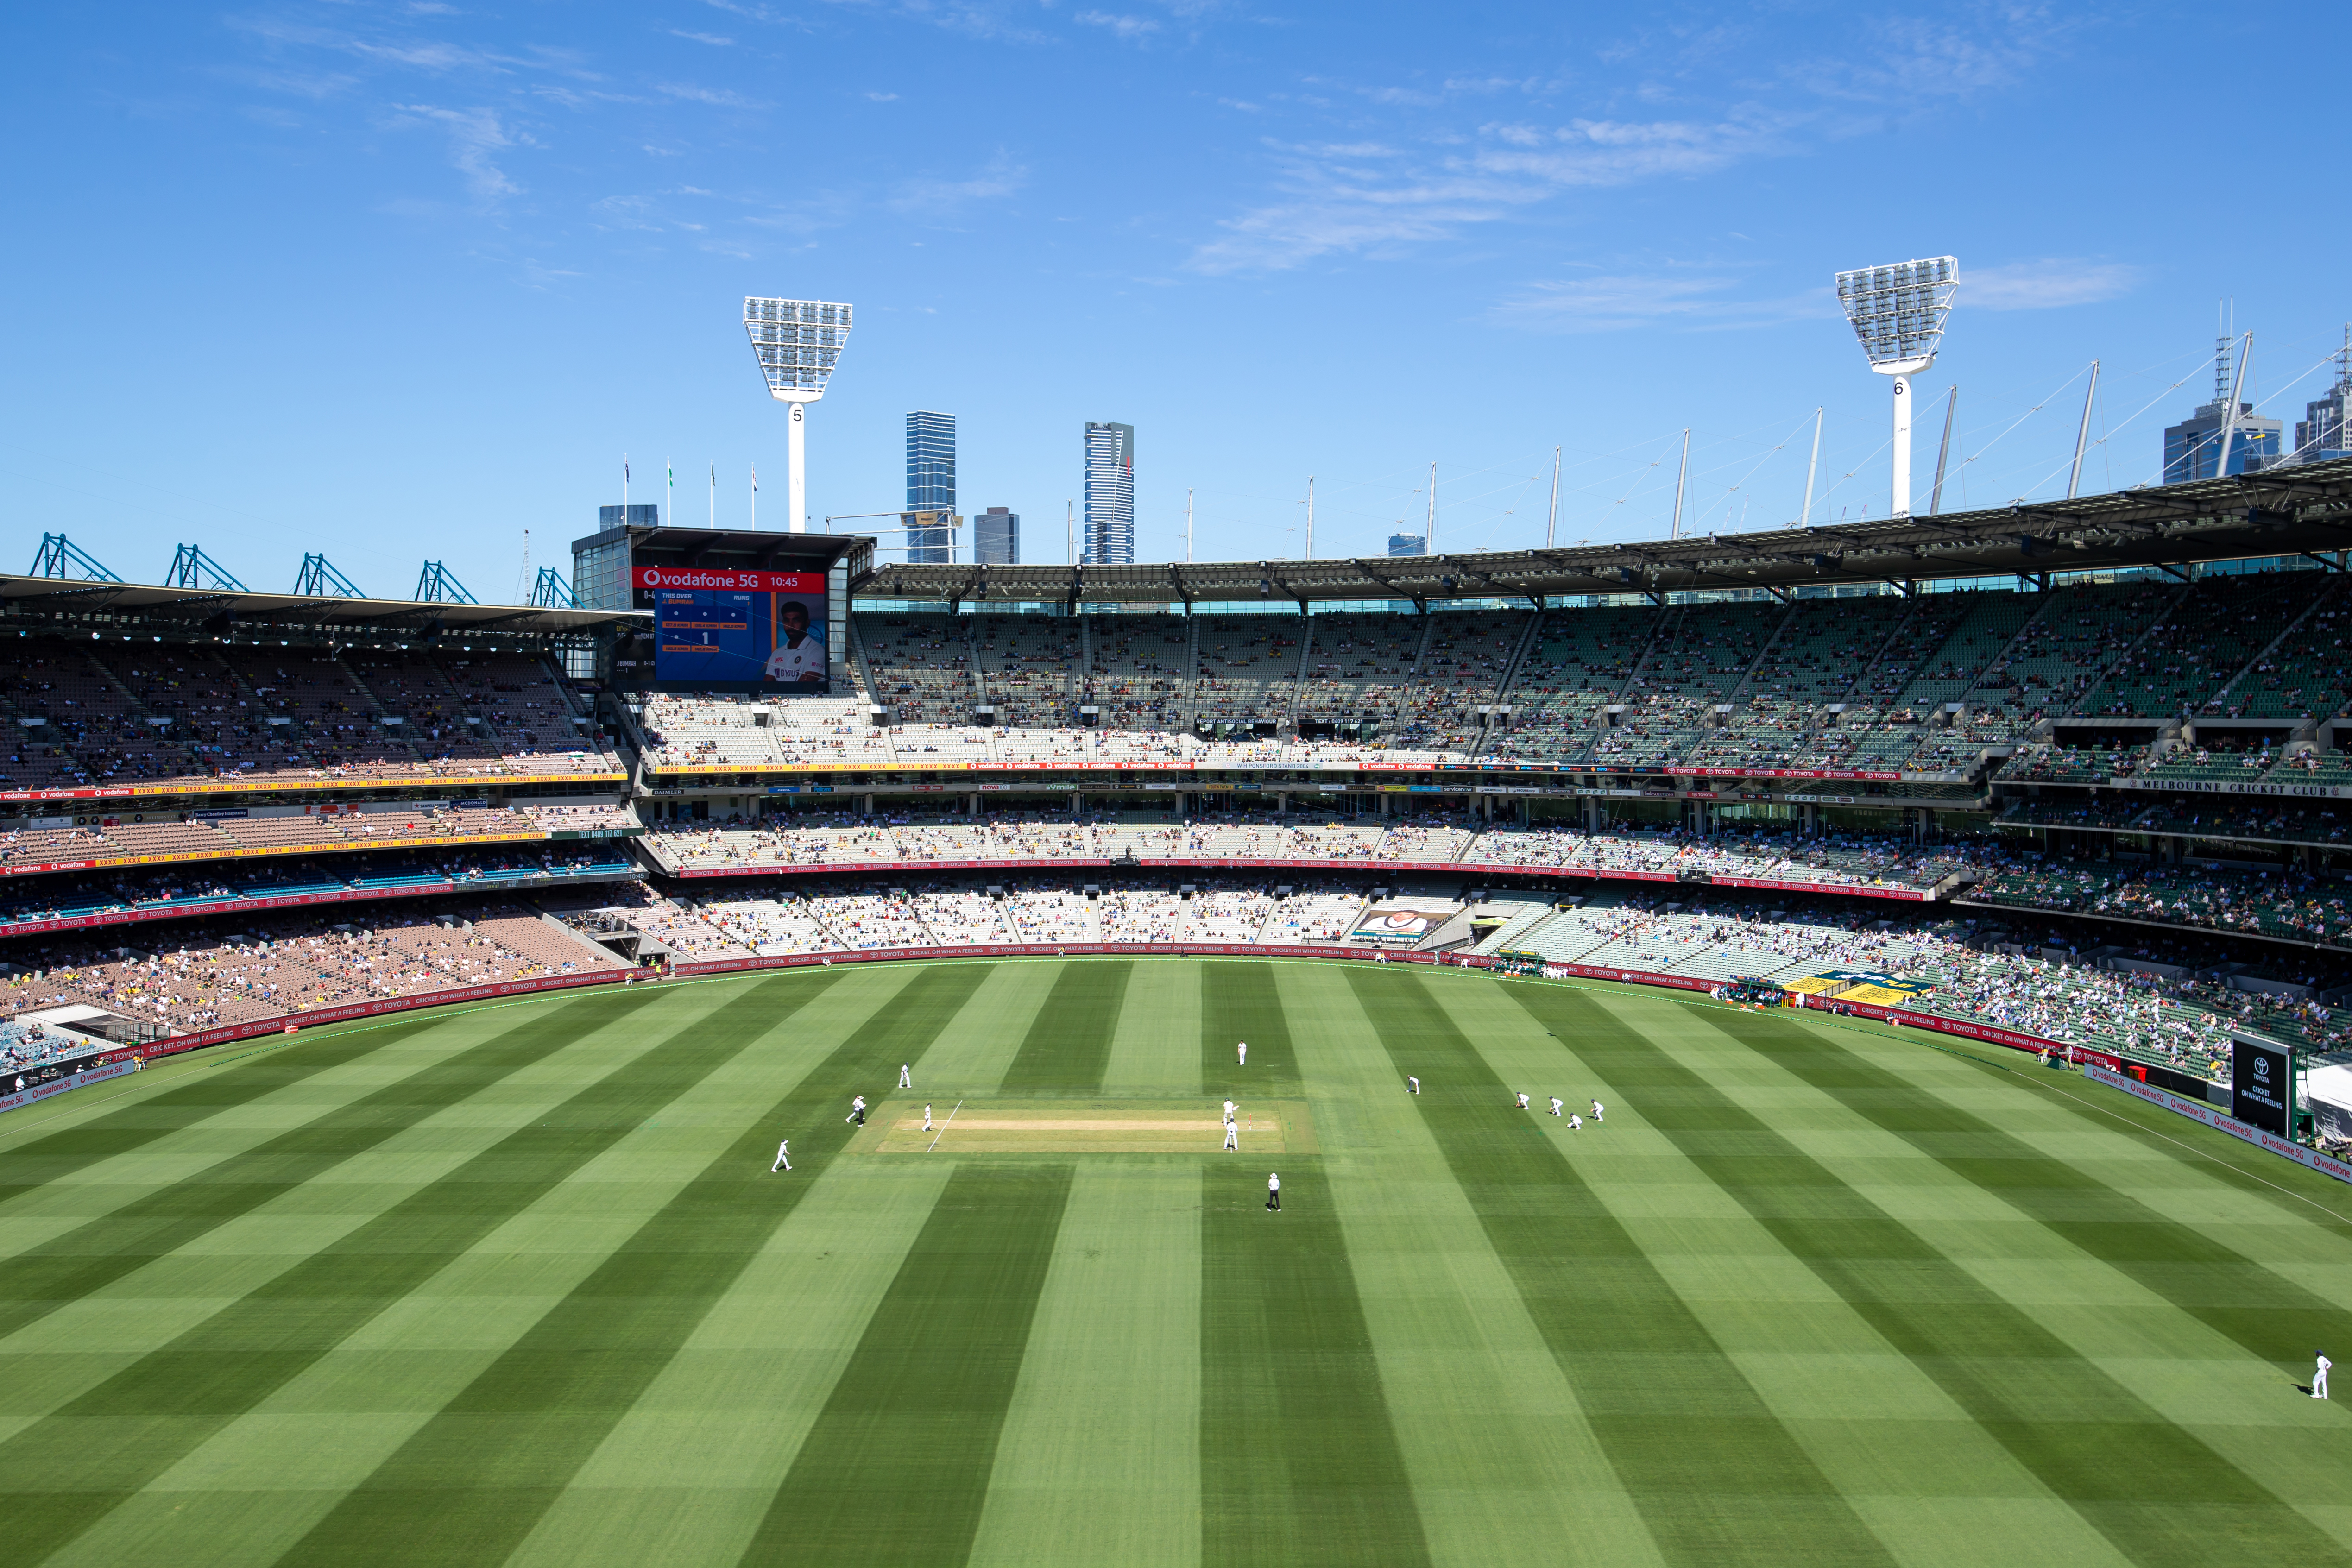 Boxing Day Test